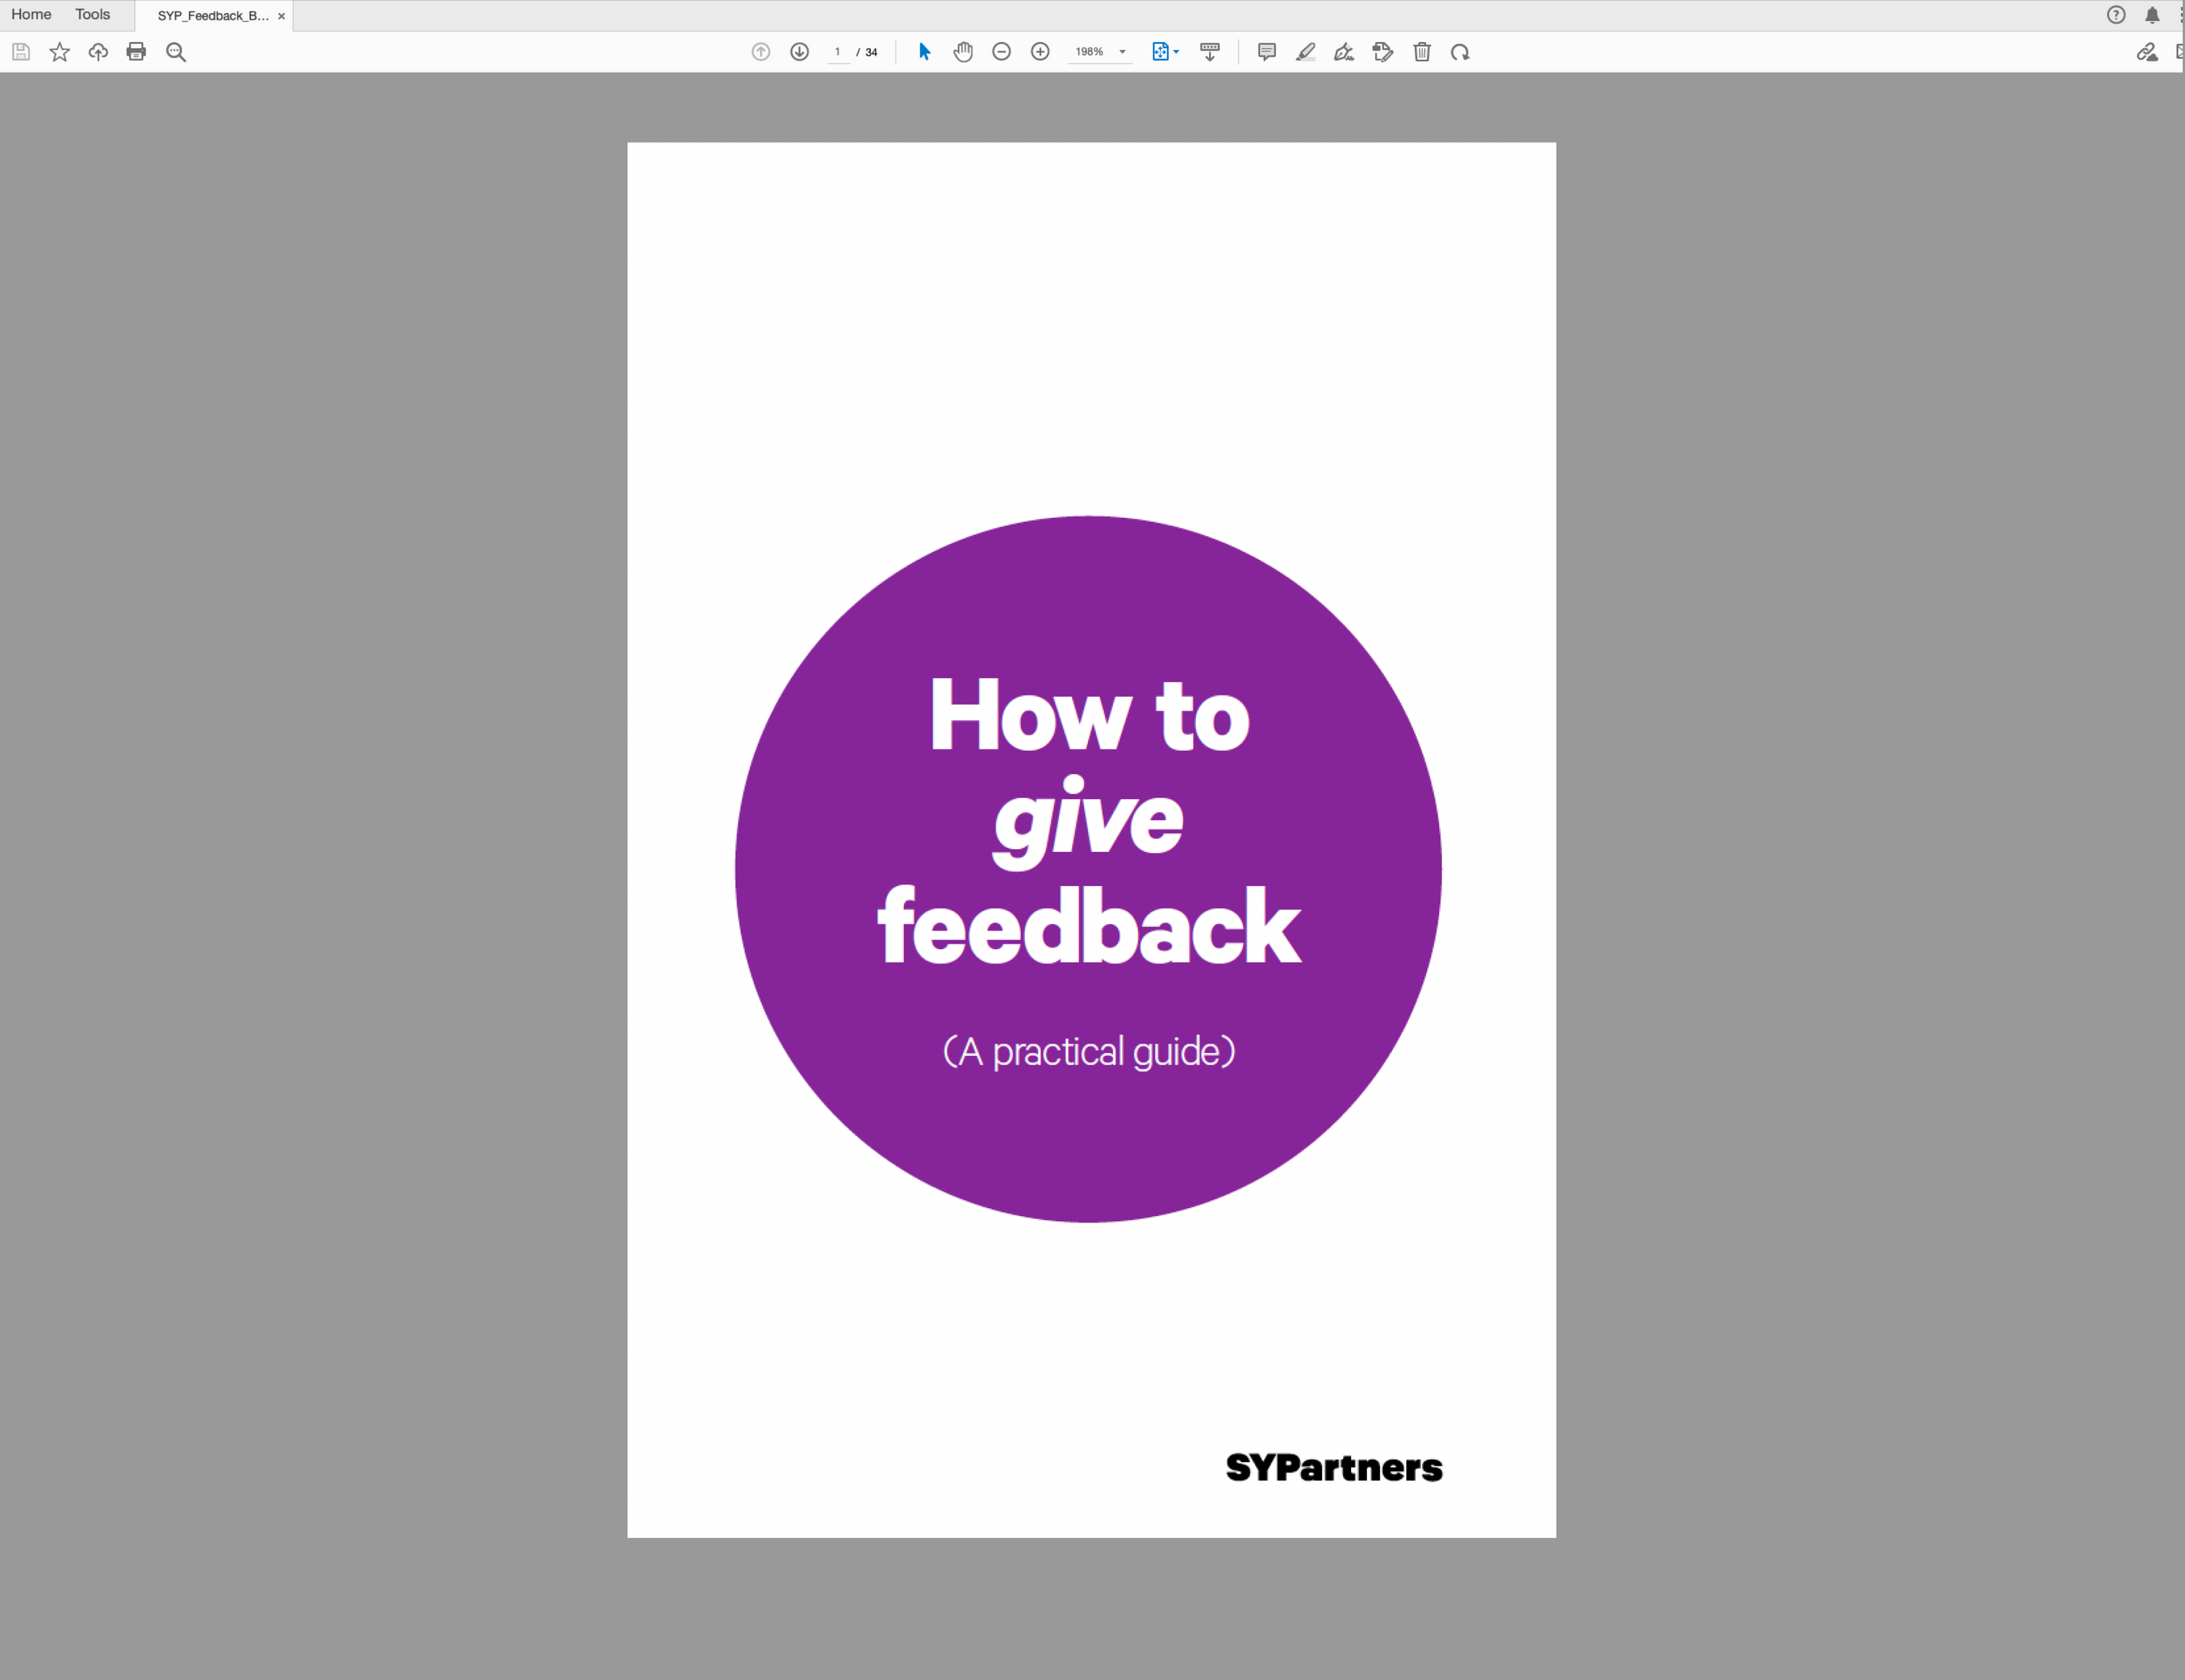 A Practical Guide to Feedback PDF—digital download